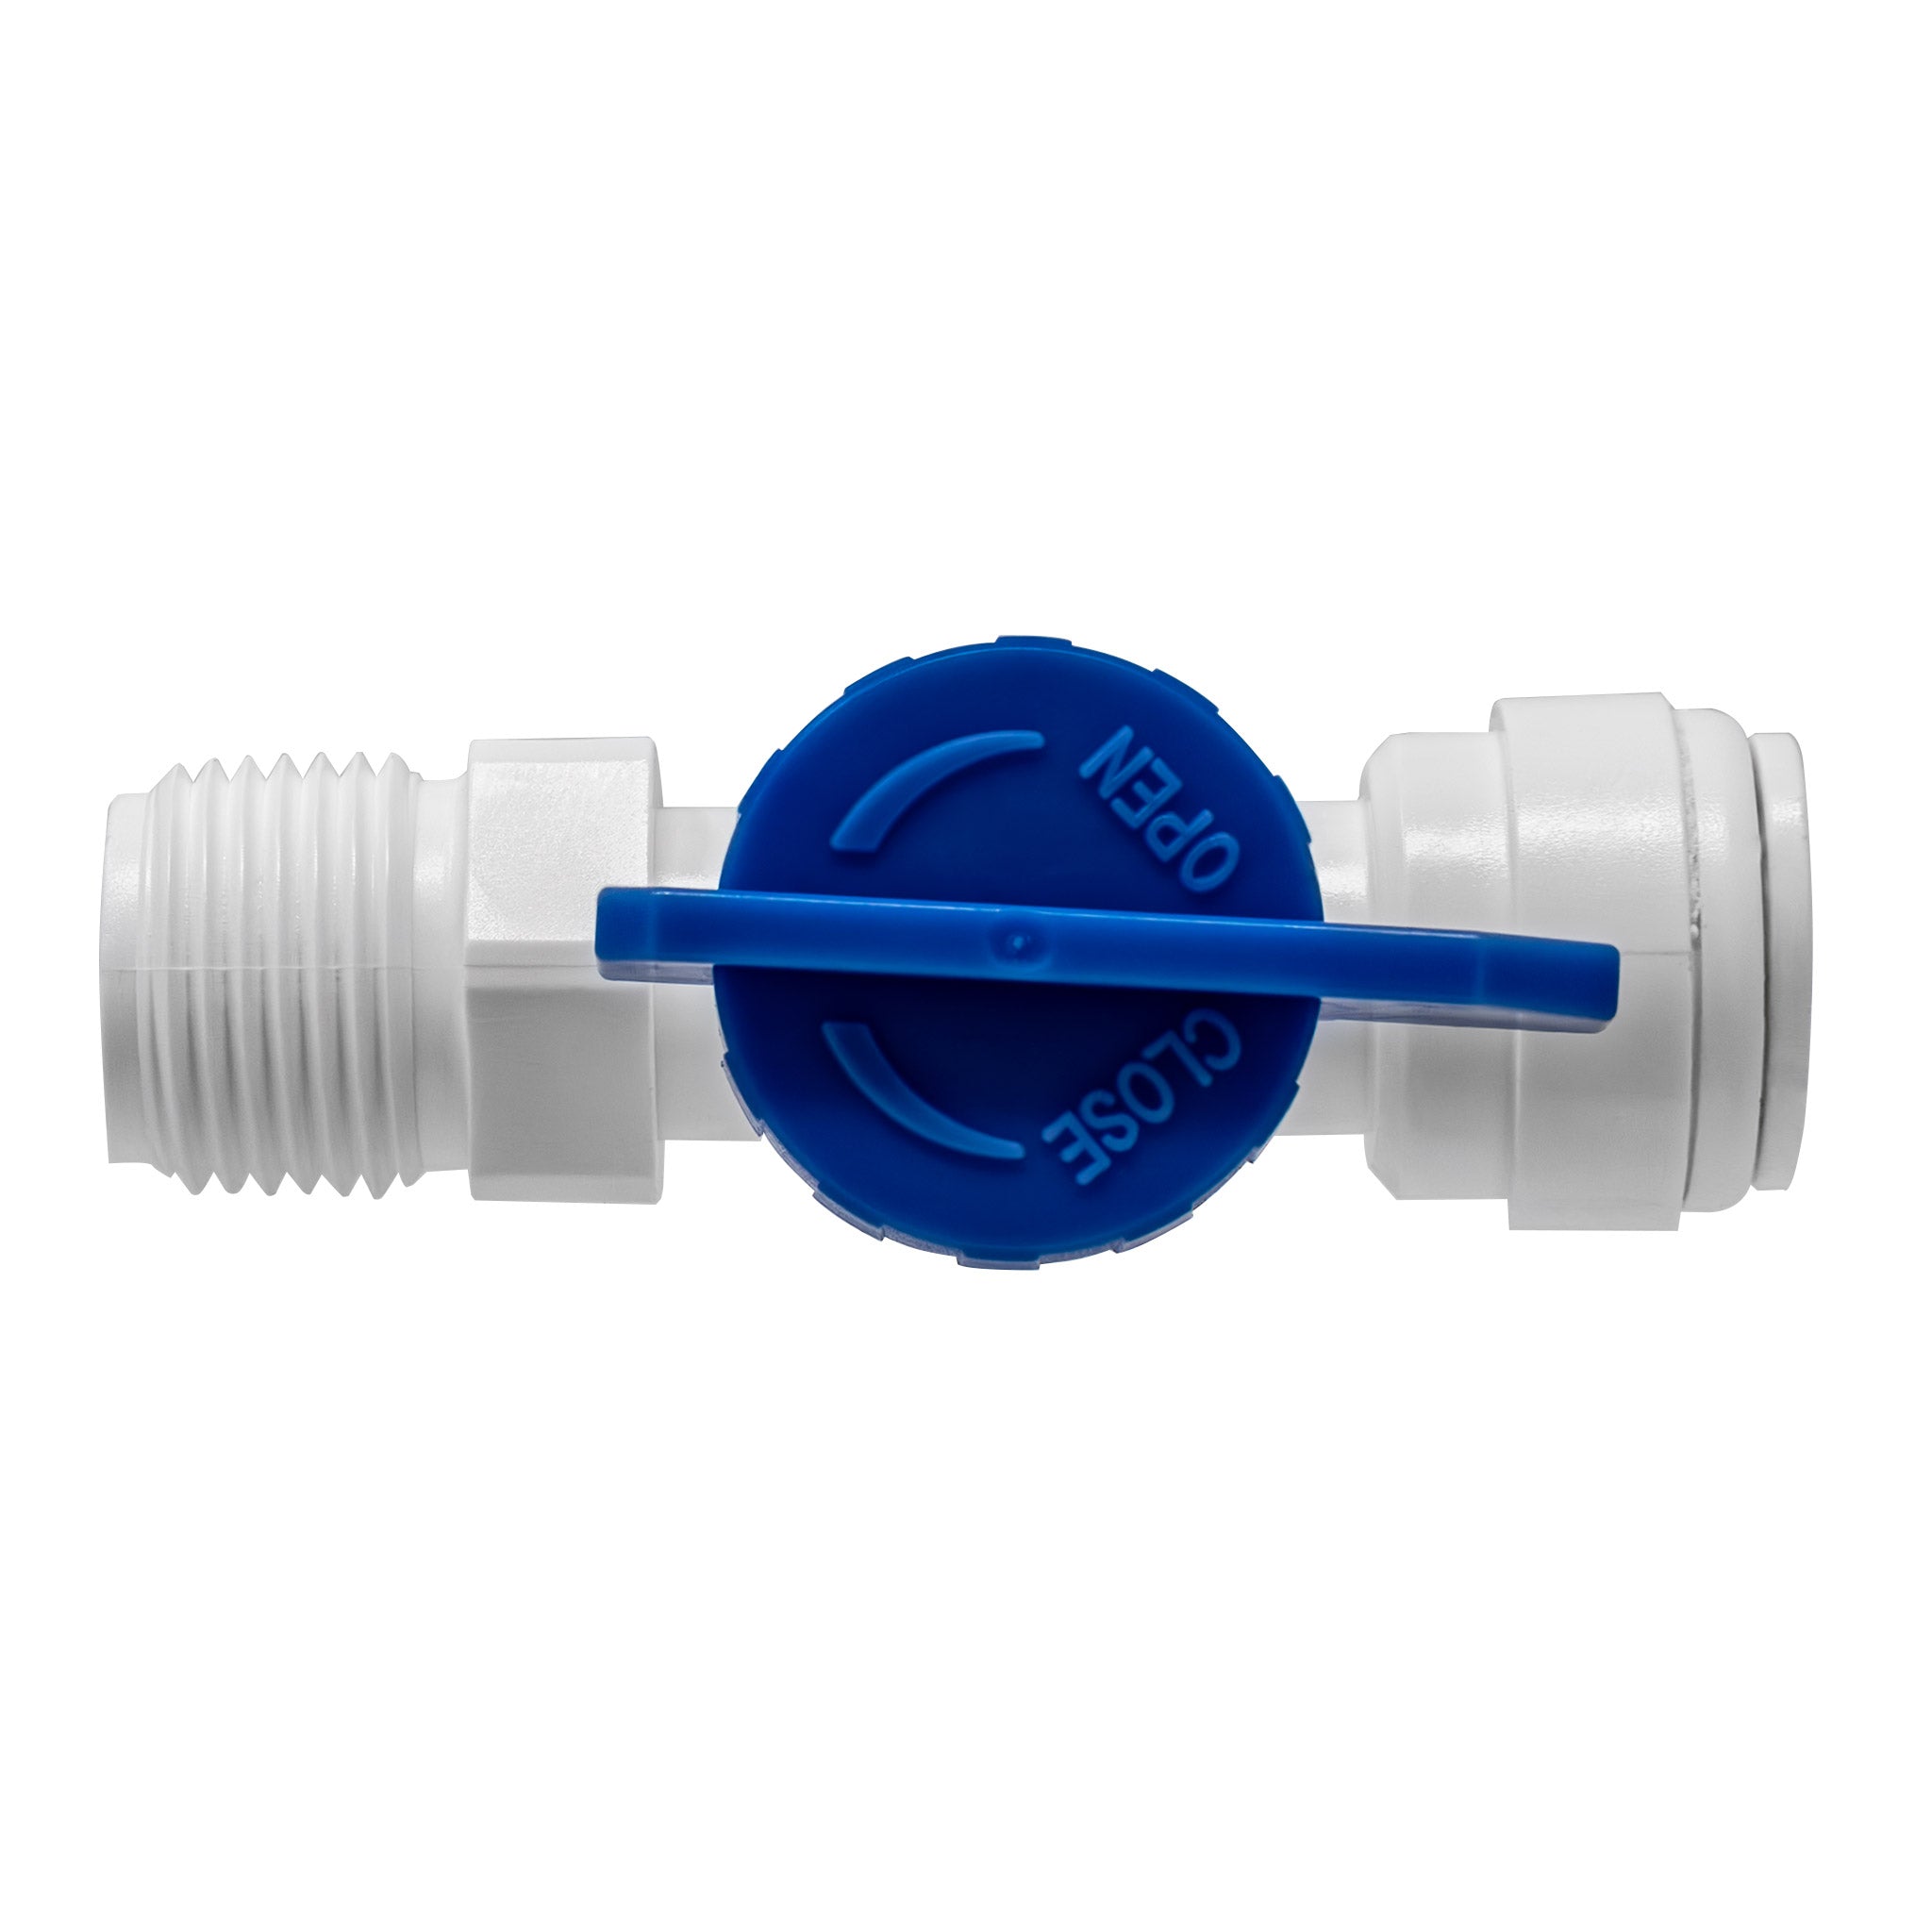 Quick connect in-line ball valve. 3/8" quick connect x 3/8" male thread.